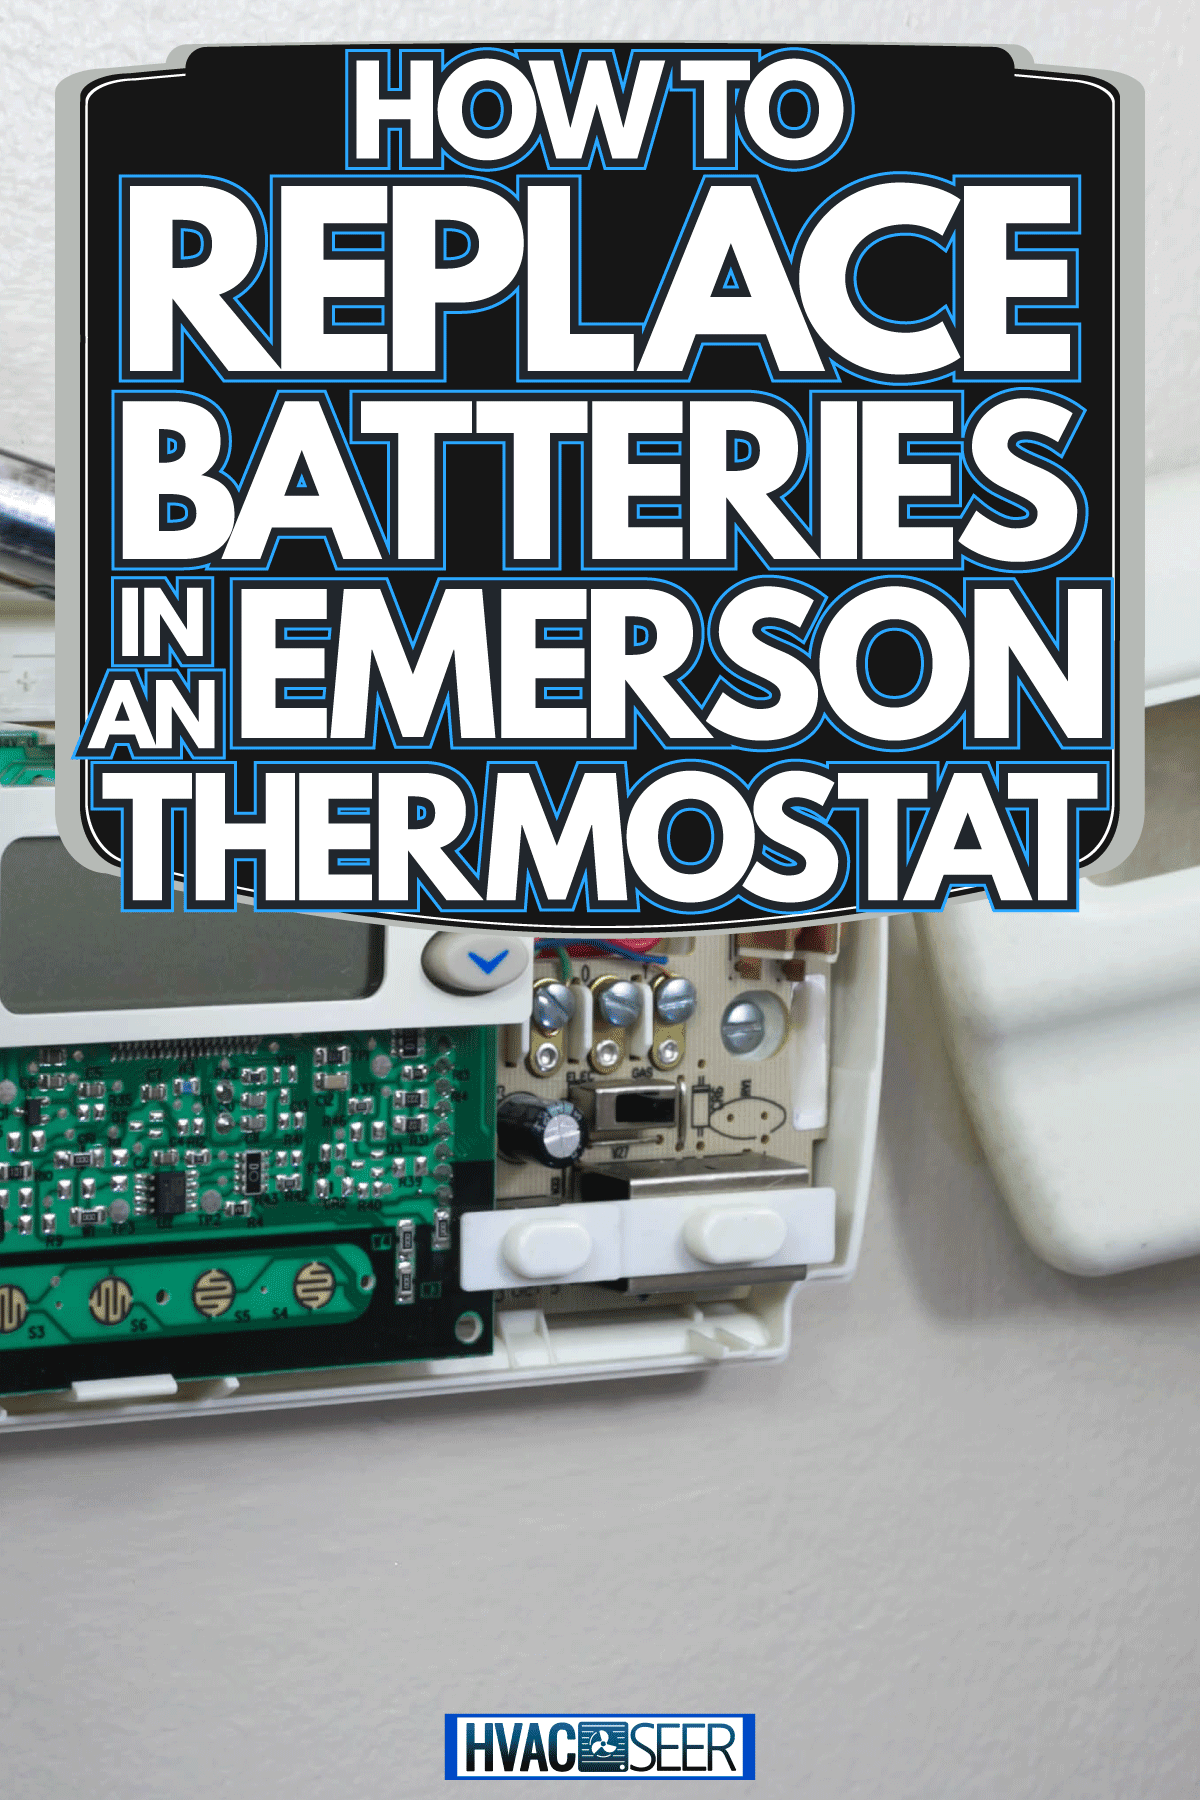 HVAC Technician Installing Batteries in Digital Heating and Cooling thermostat, How To Replace Batteries In An Emerson Thermostat